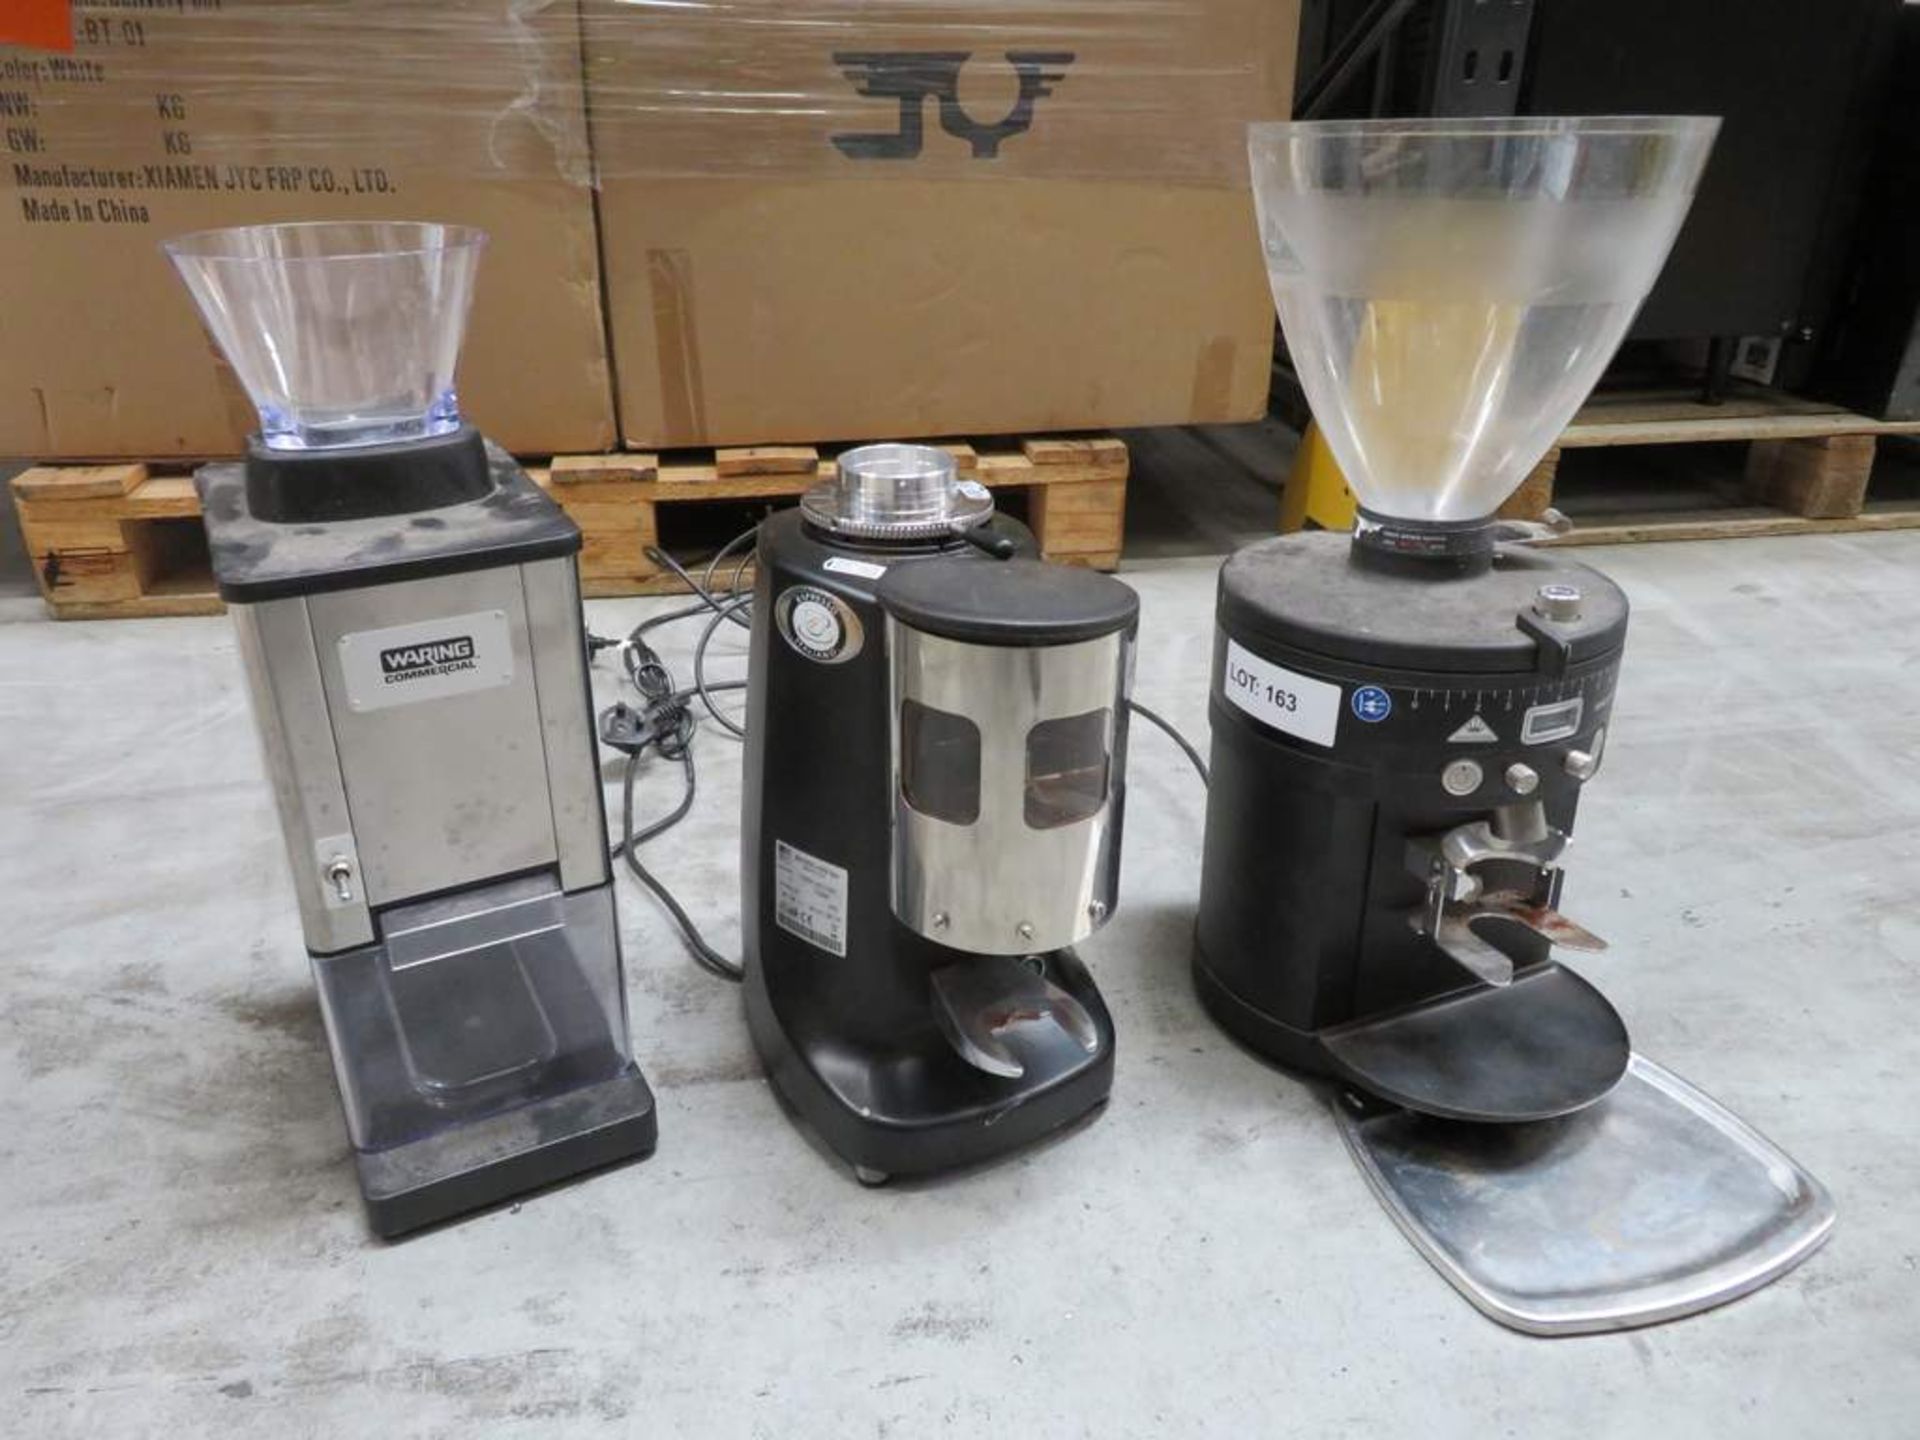 Mahlkonig, Mazzer Luigi and Wearing commercial coffee grinders.